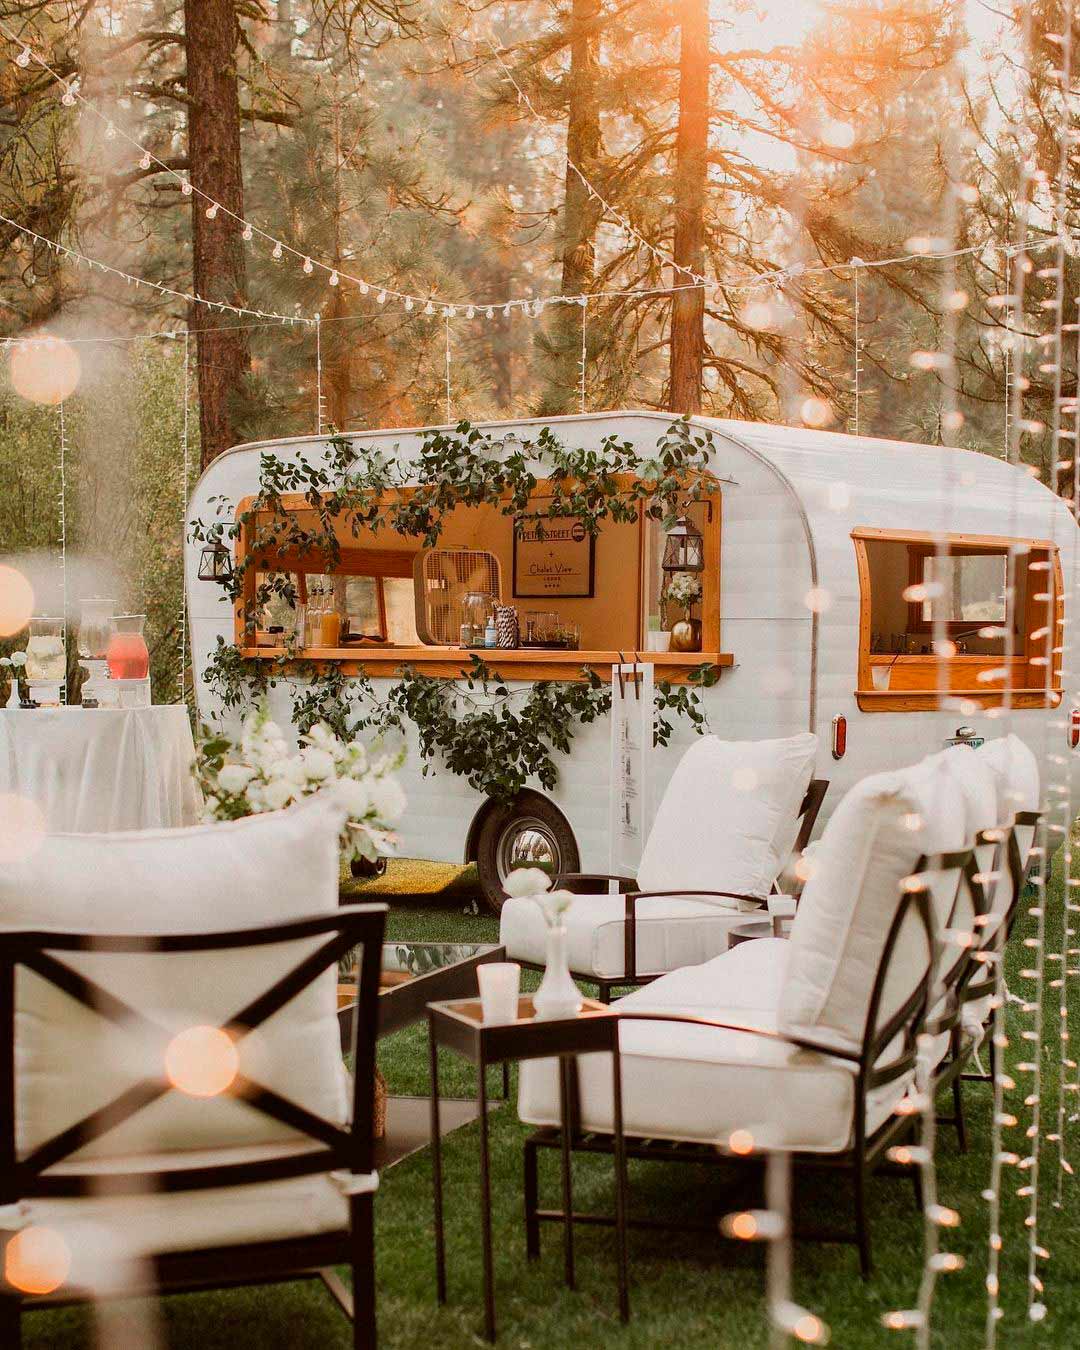 planning a small wedding food truck